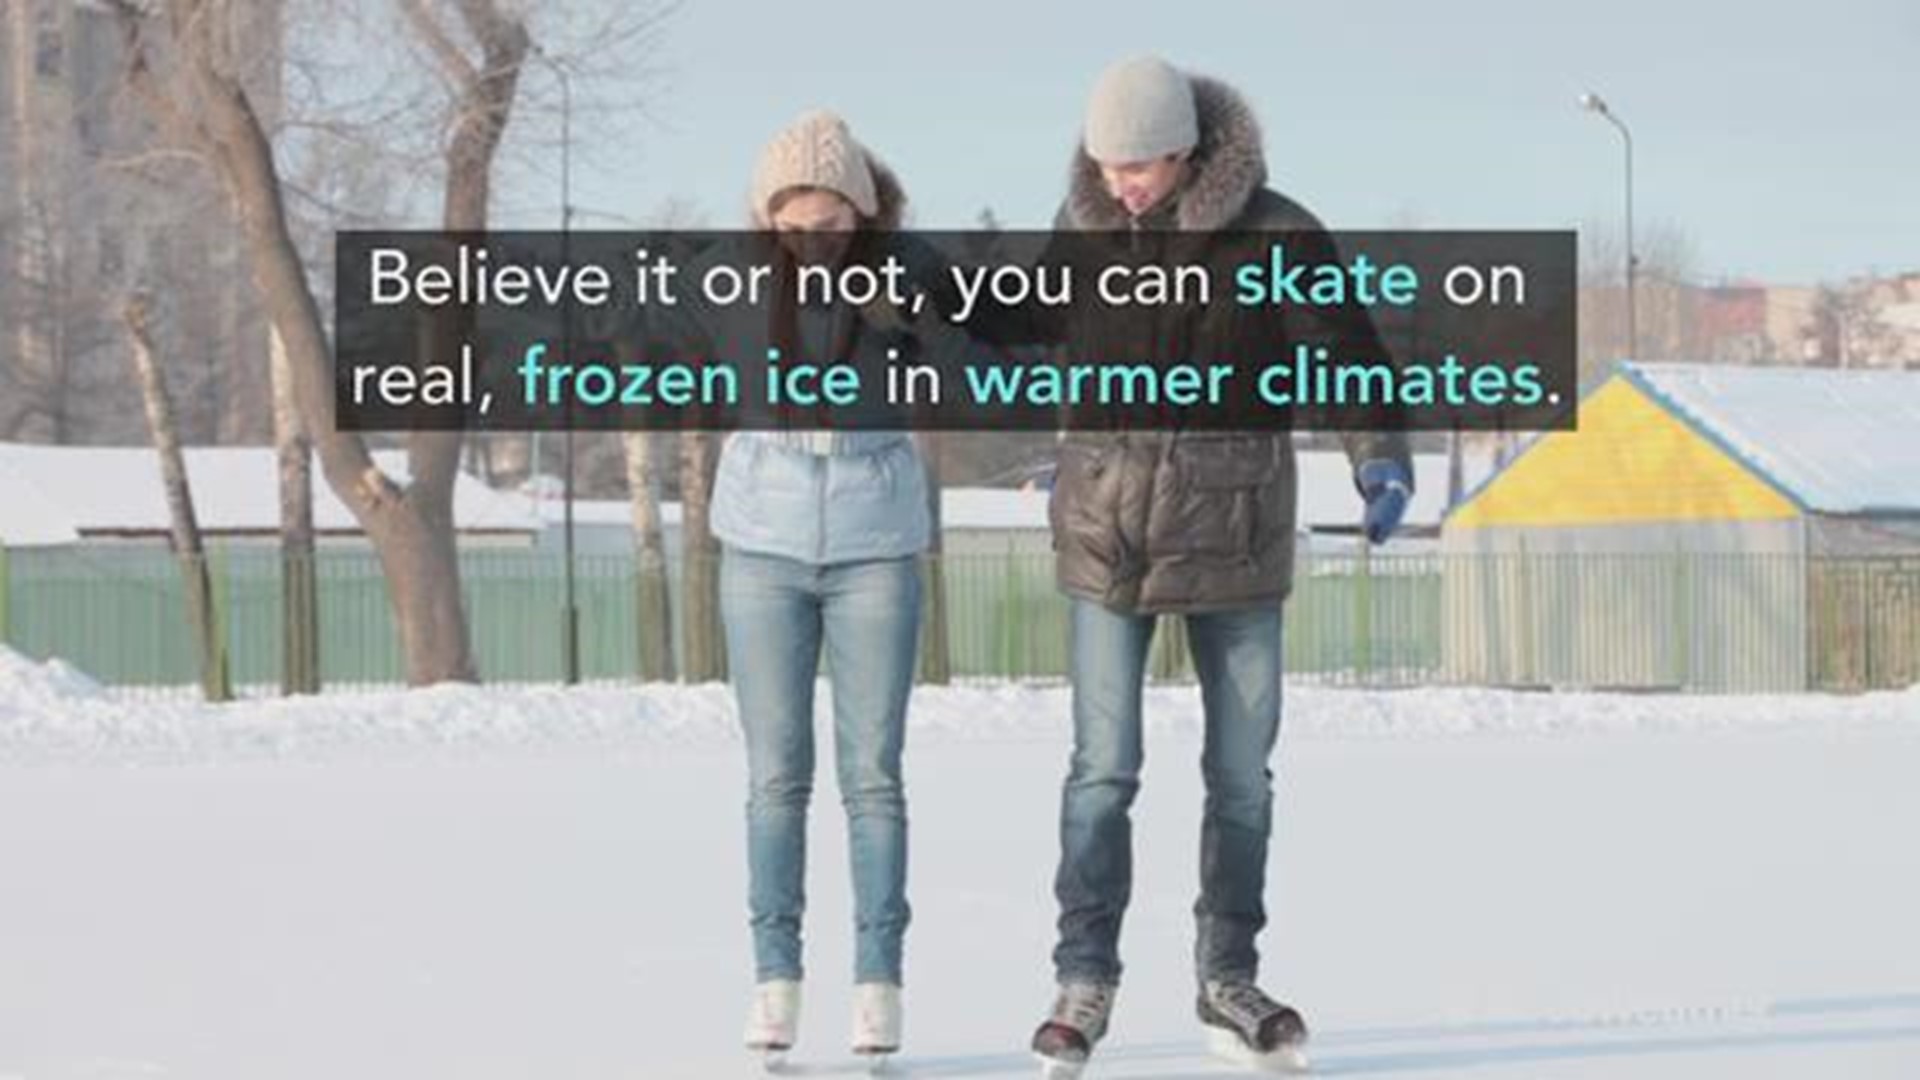 Have you ever wondered how outdoor ice rinks kept cold during winter, even in warm weather conditions?